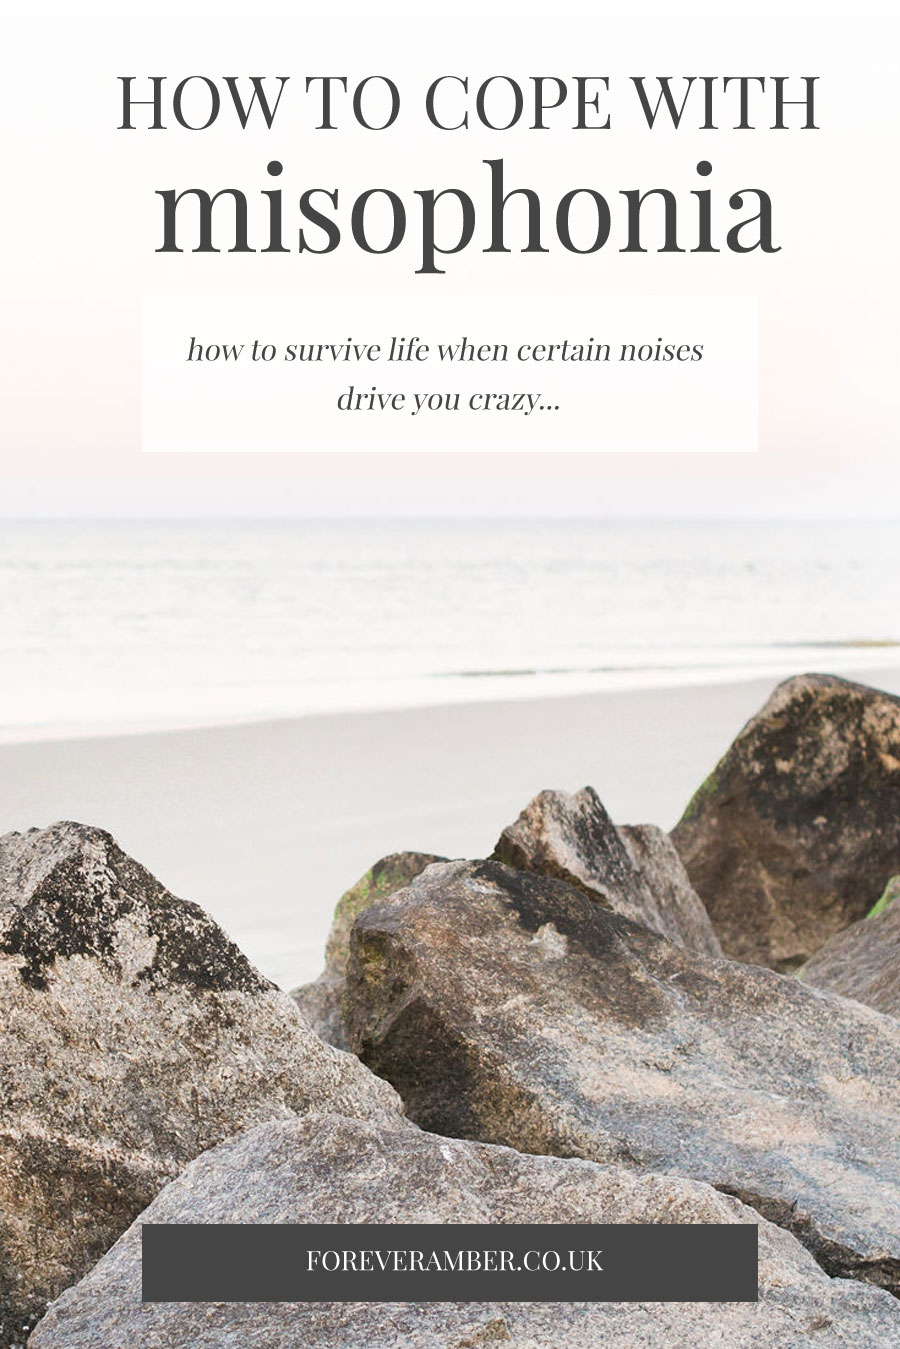 How to cope with misophonia